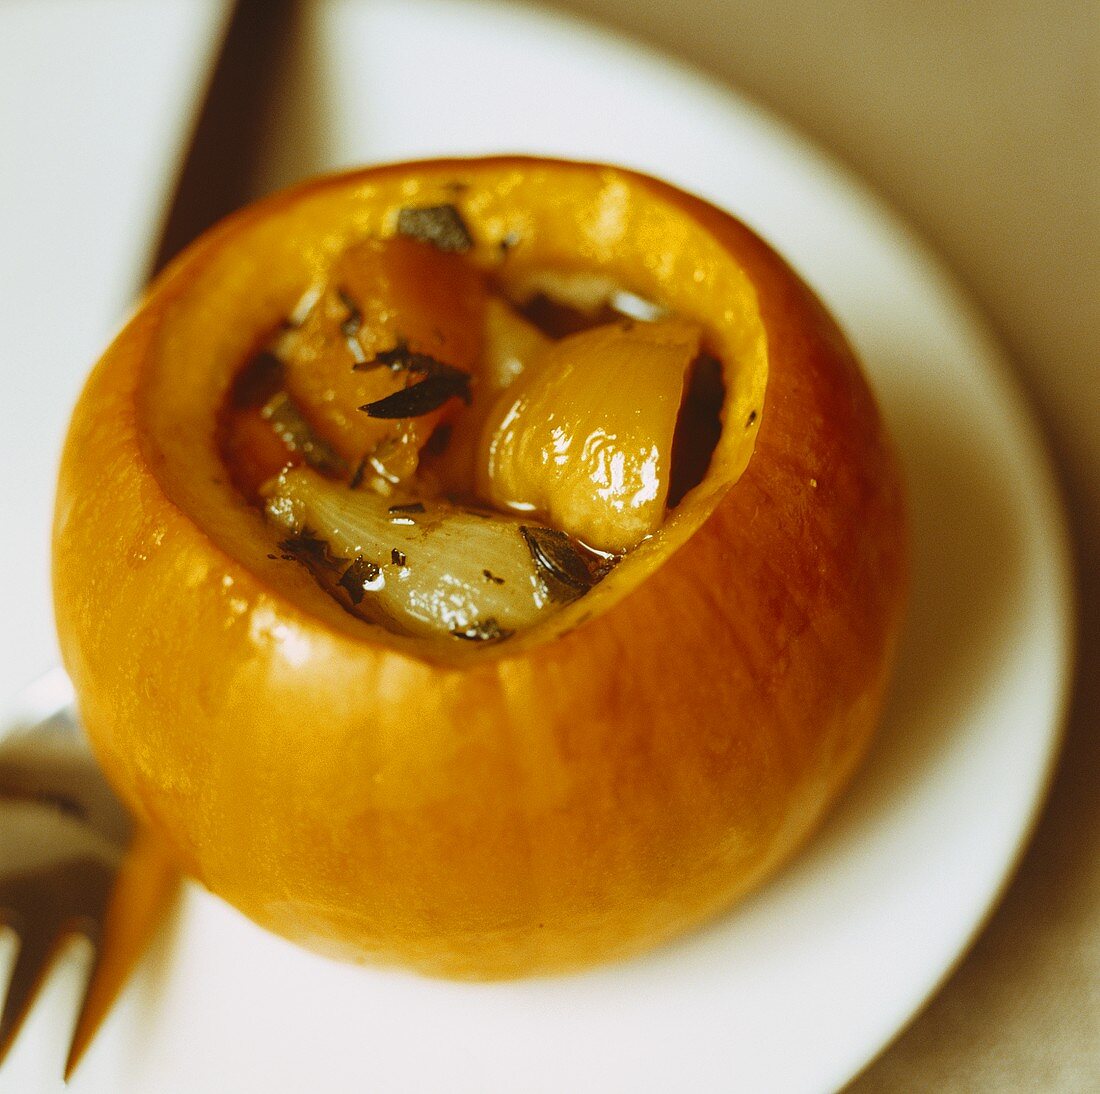 Pumpkin stuffed with shallots and chestnuts